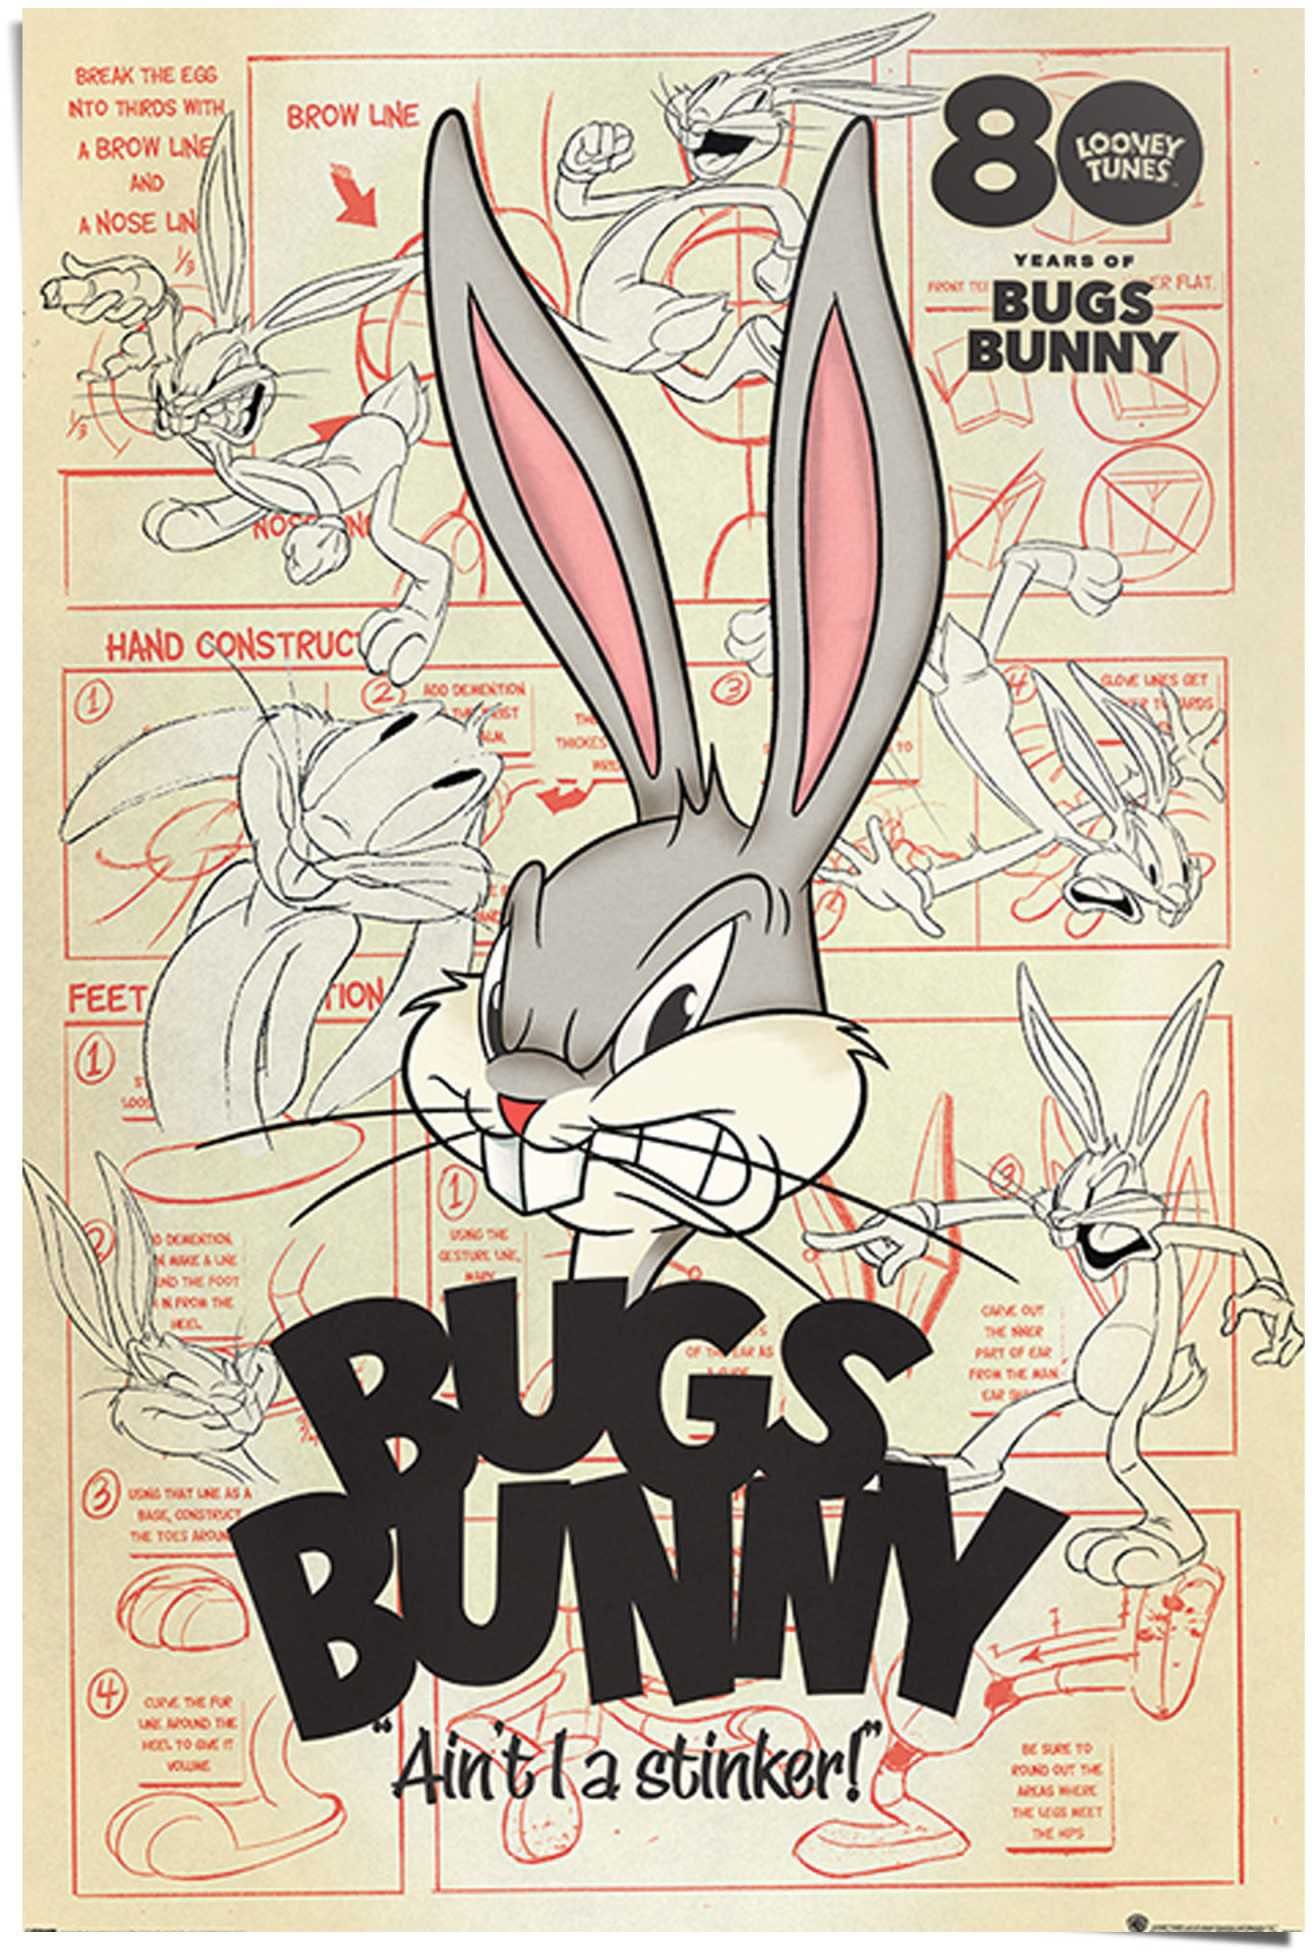 St) ait Tunes Bugs I stinker Warner Poster a - - Bros Looney (1 Reinders! Bunny Hase,